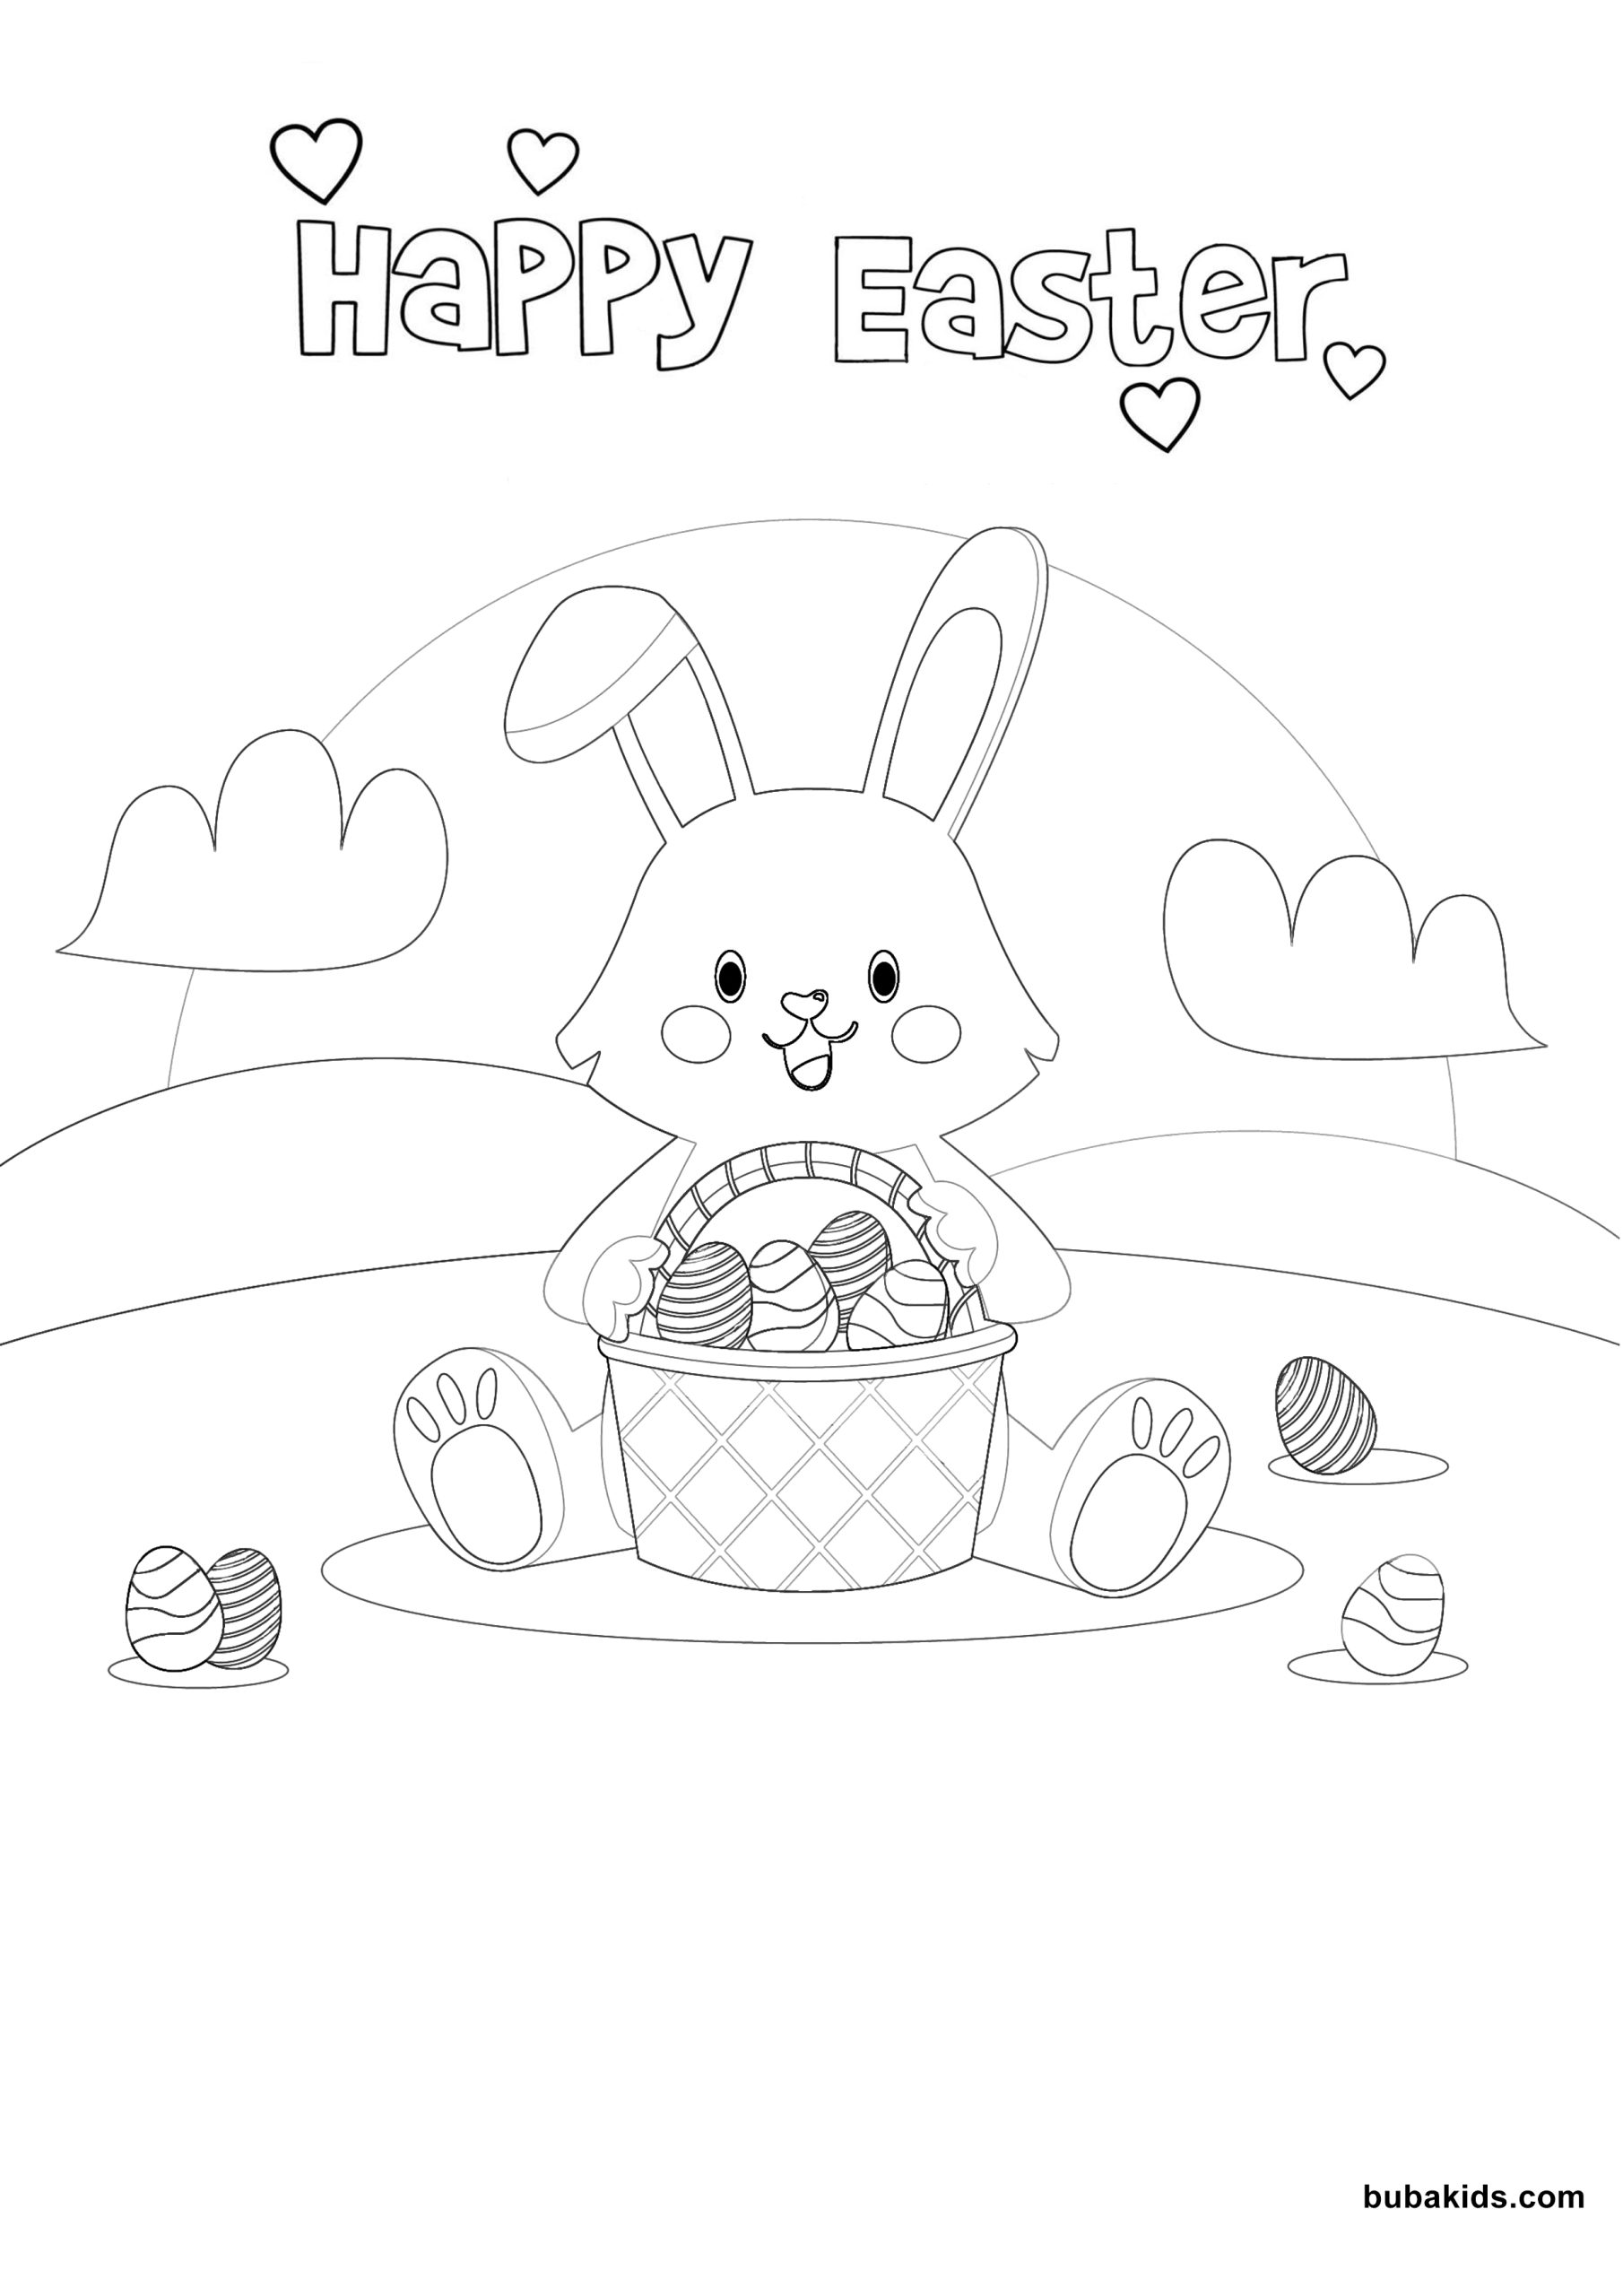 Happy Easter 2022 Bunny and Eggs Wallpaper